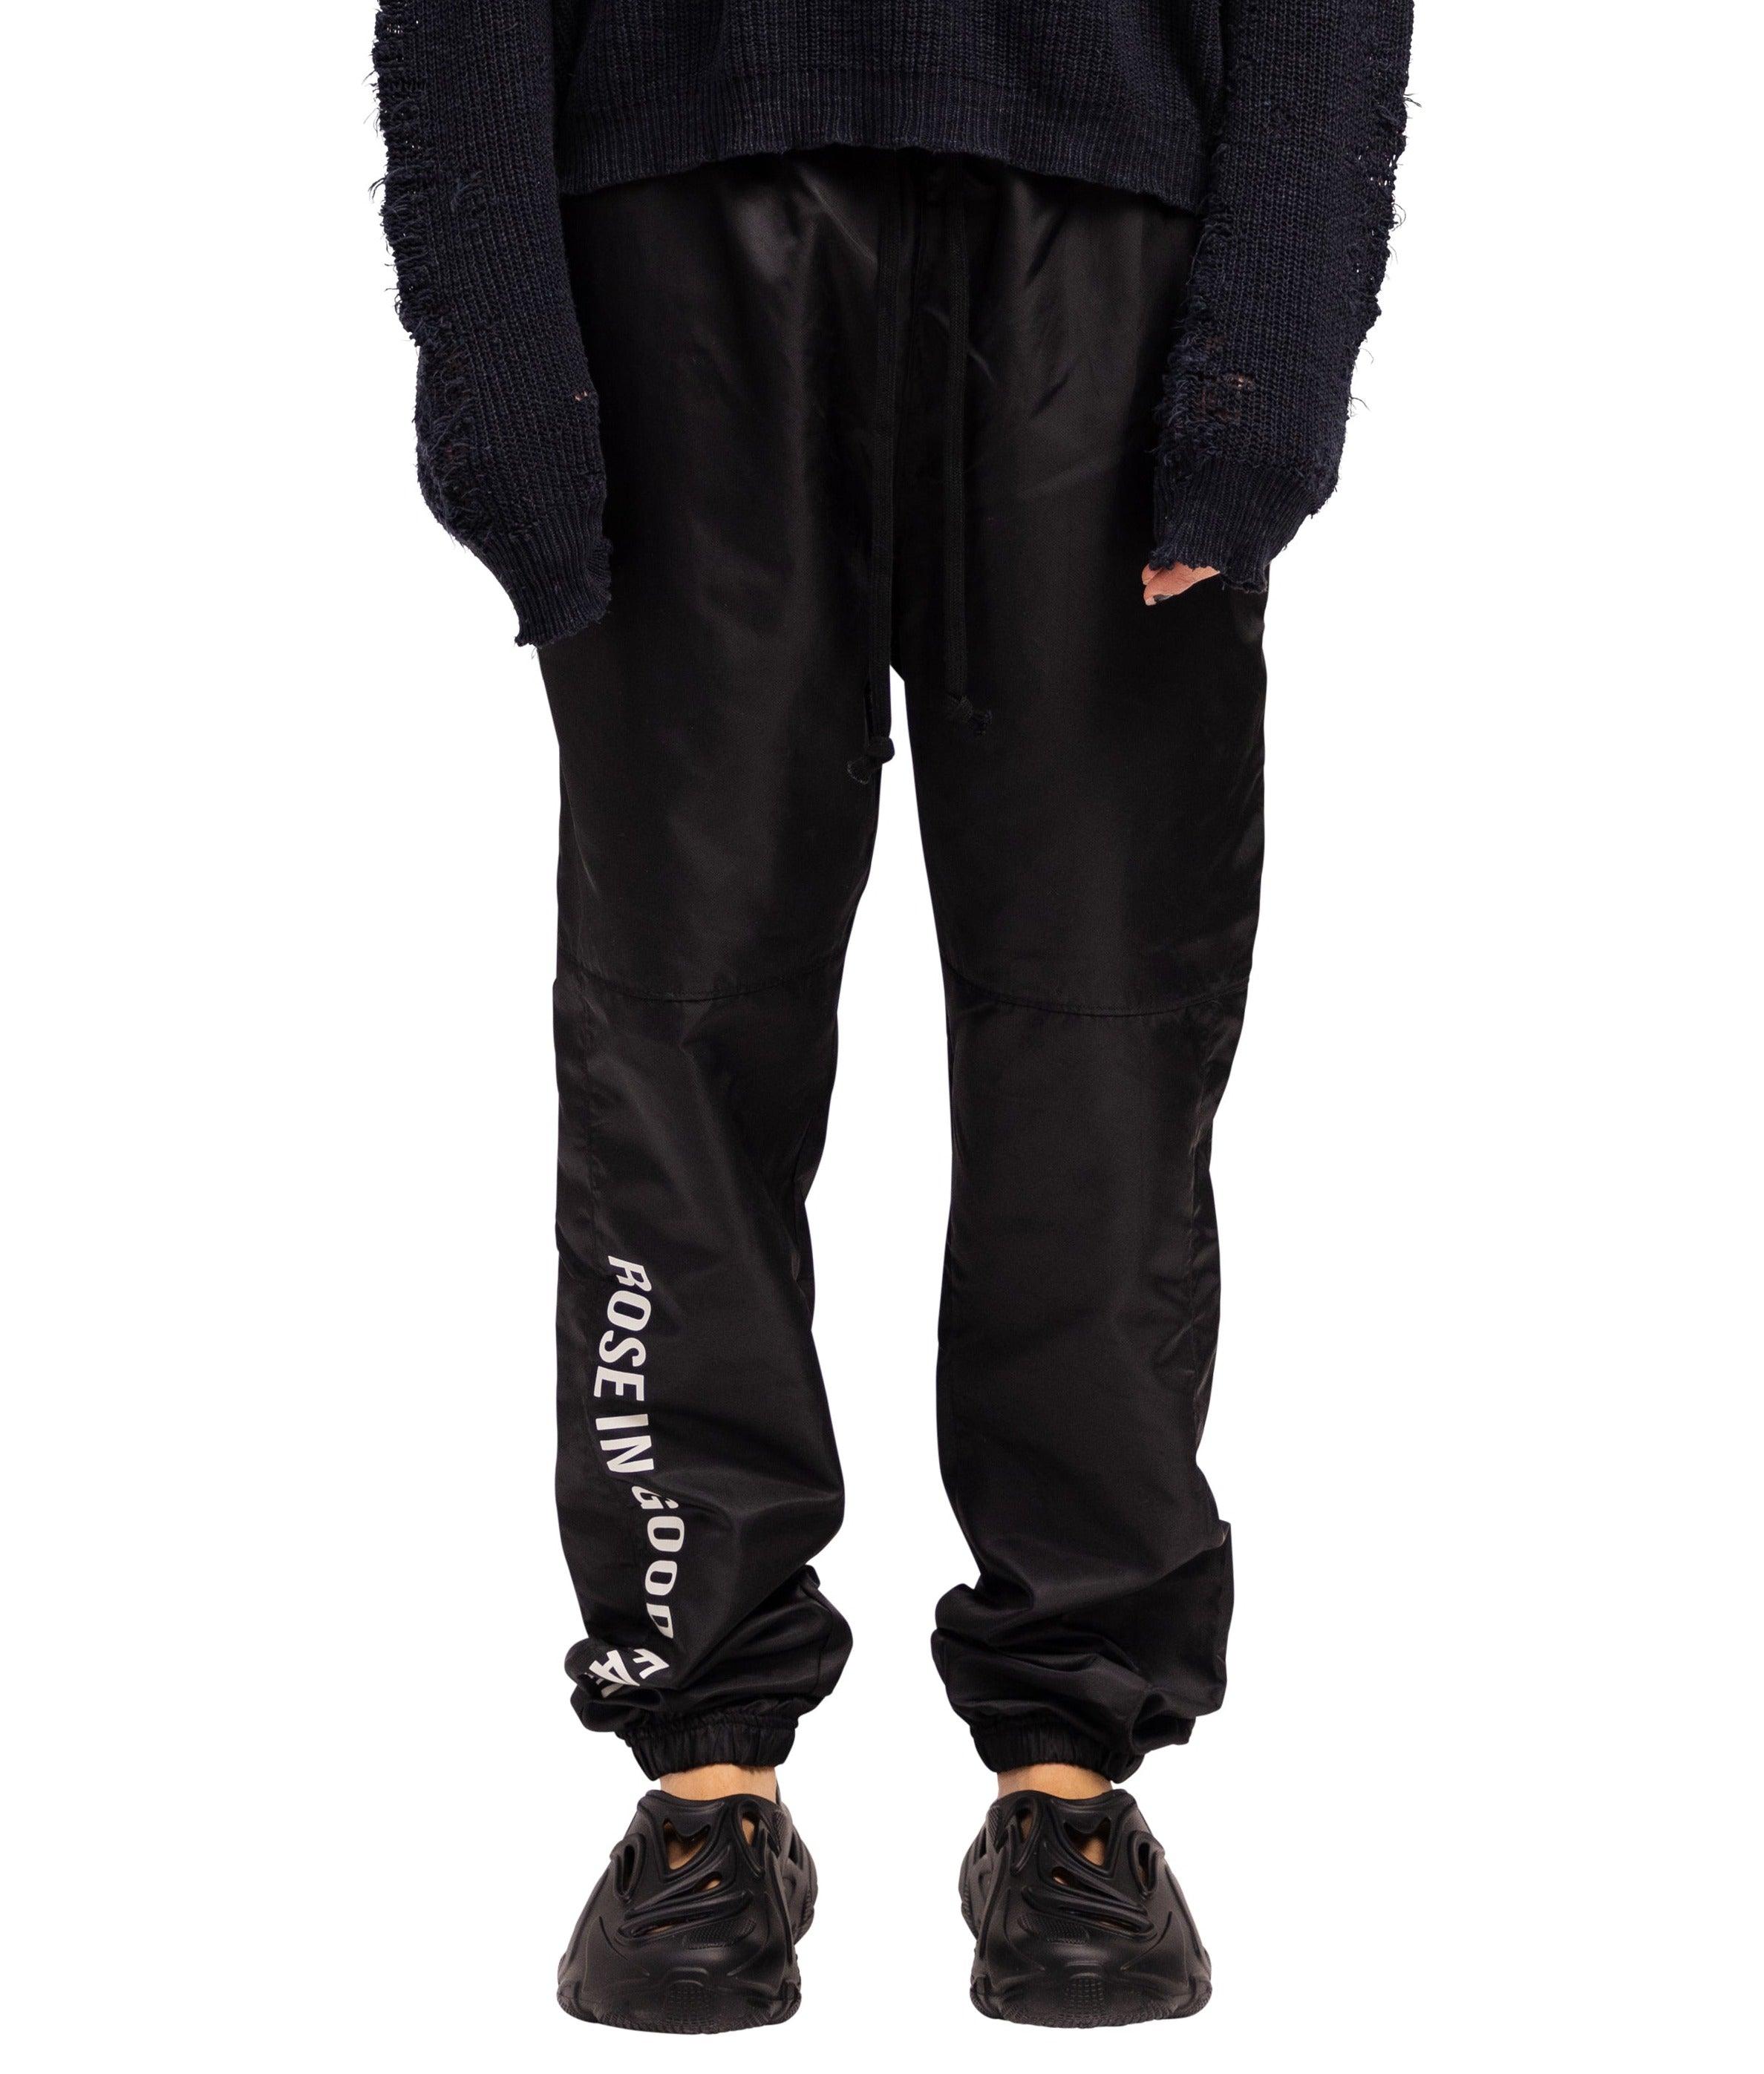 PANEL TRACK PANTS - PANEL TRACK PANTS - ROSE IN GOOD FAITH